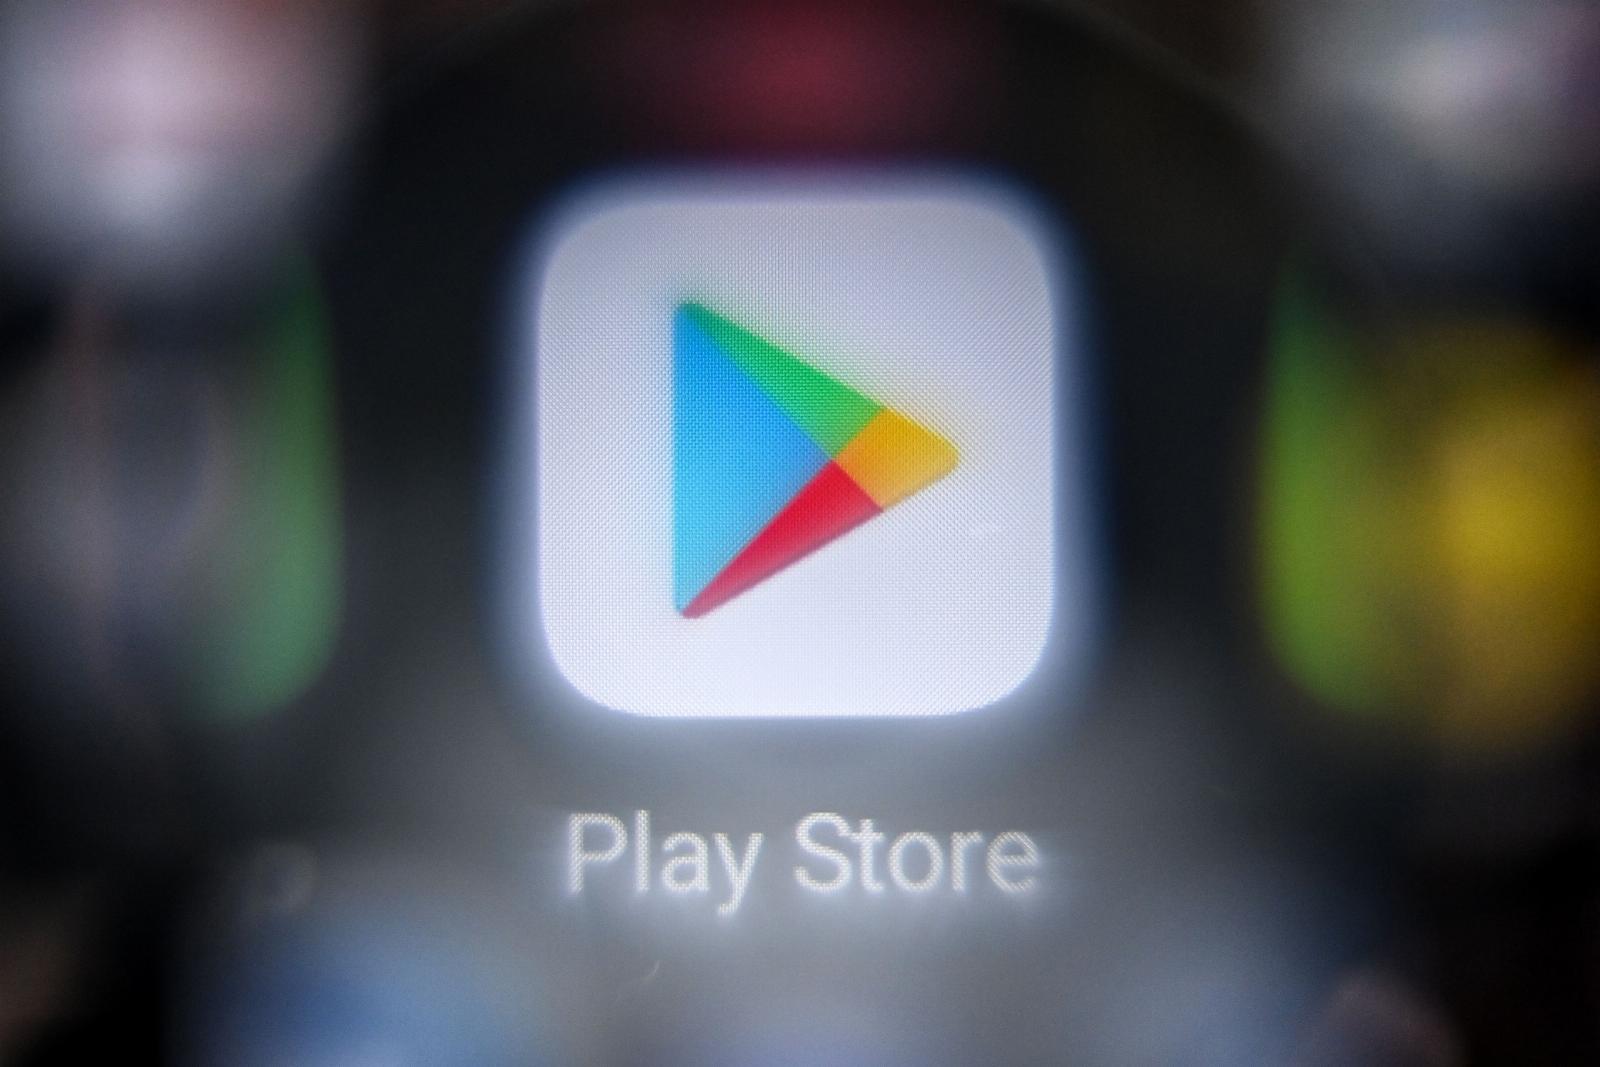 Google brings AI and more to the Play Store